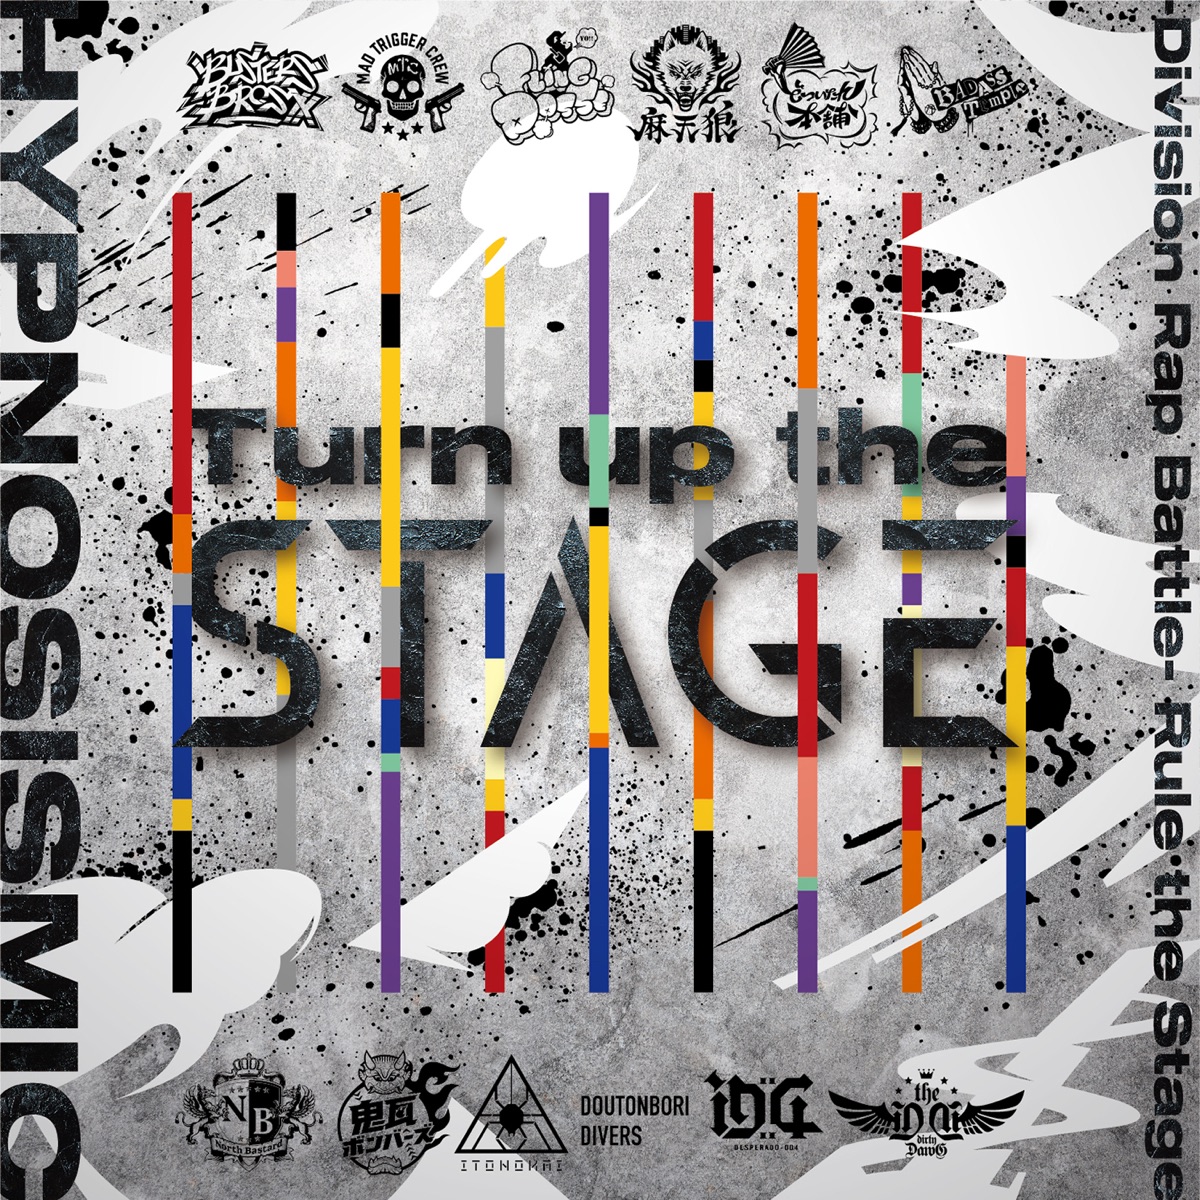 Cover art for『Hypnosis Mic -D.R.B- Rule the Stage (Dotsuitare Honpo) - オオサカ24金マジック』from the release『Turn up the Stage